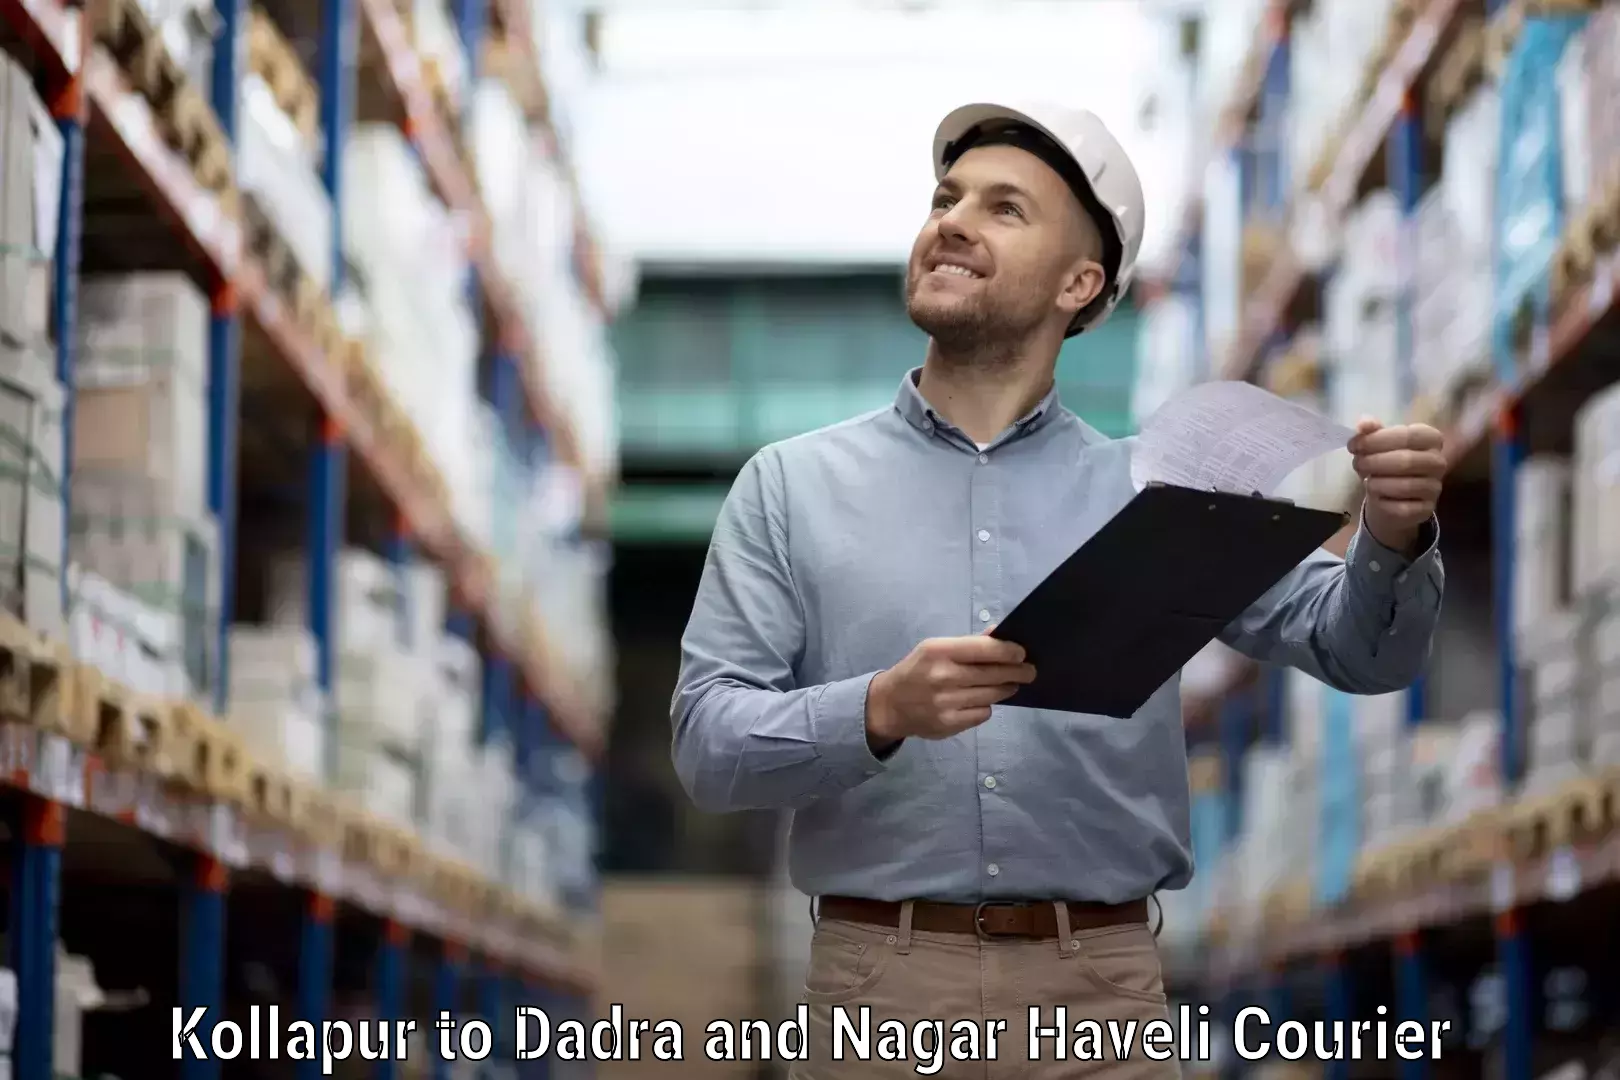 Nationwide delivery network Kollapur to Dadra and Nagar Haveli